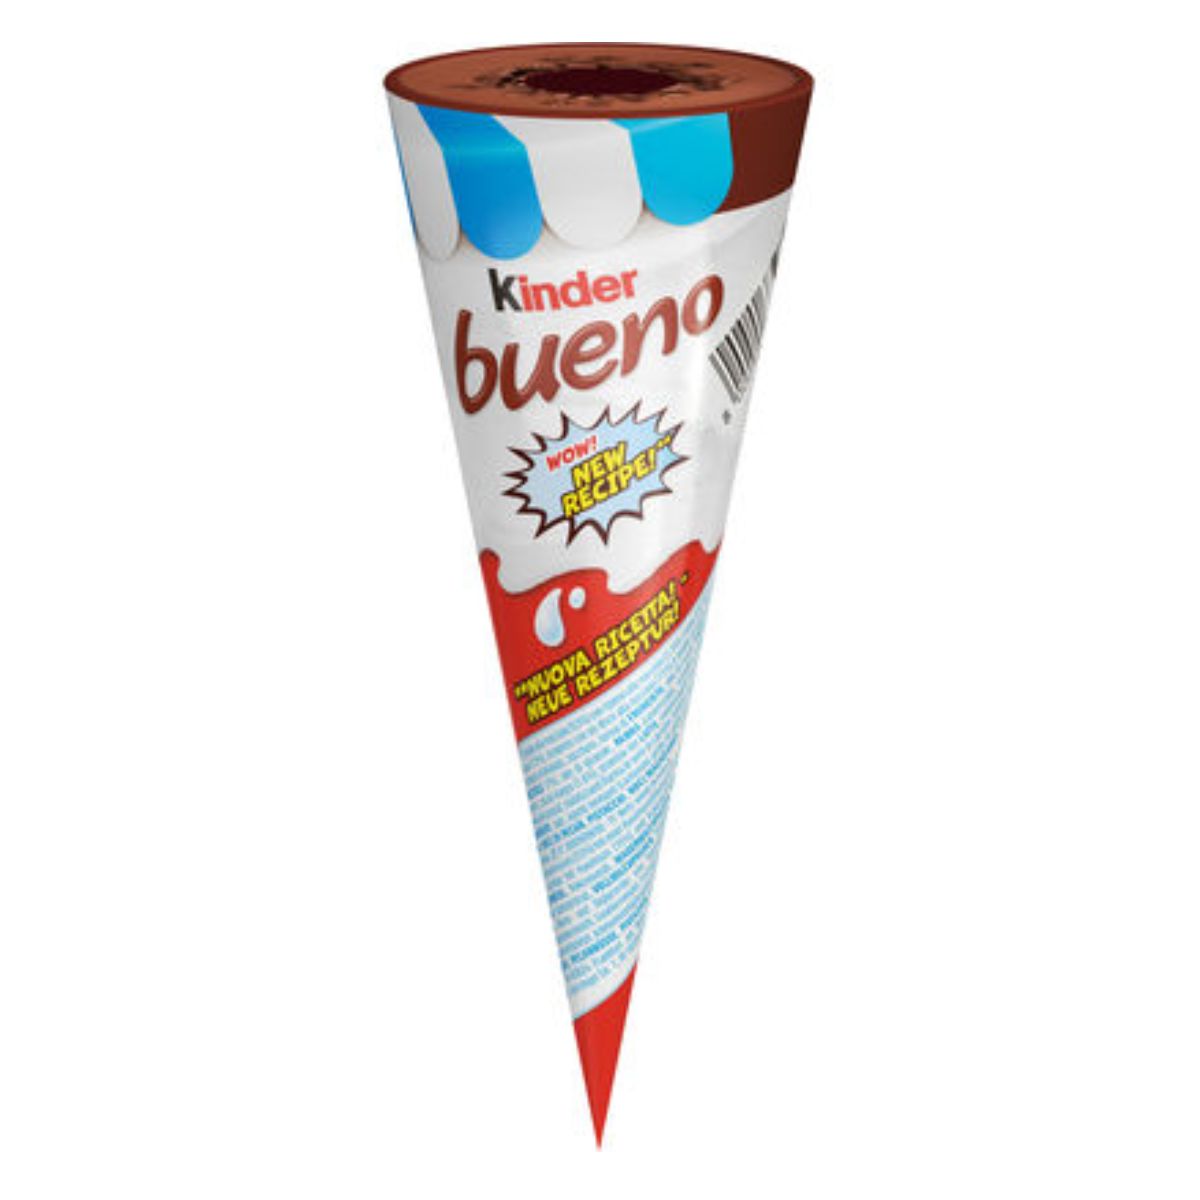 Kinder - Bueno Cone Ice Cream - 62g packaging with descriptive labels and branding.